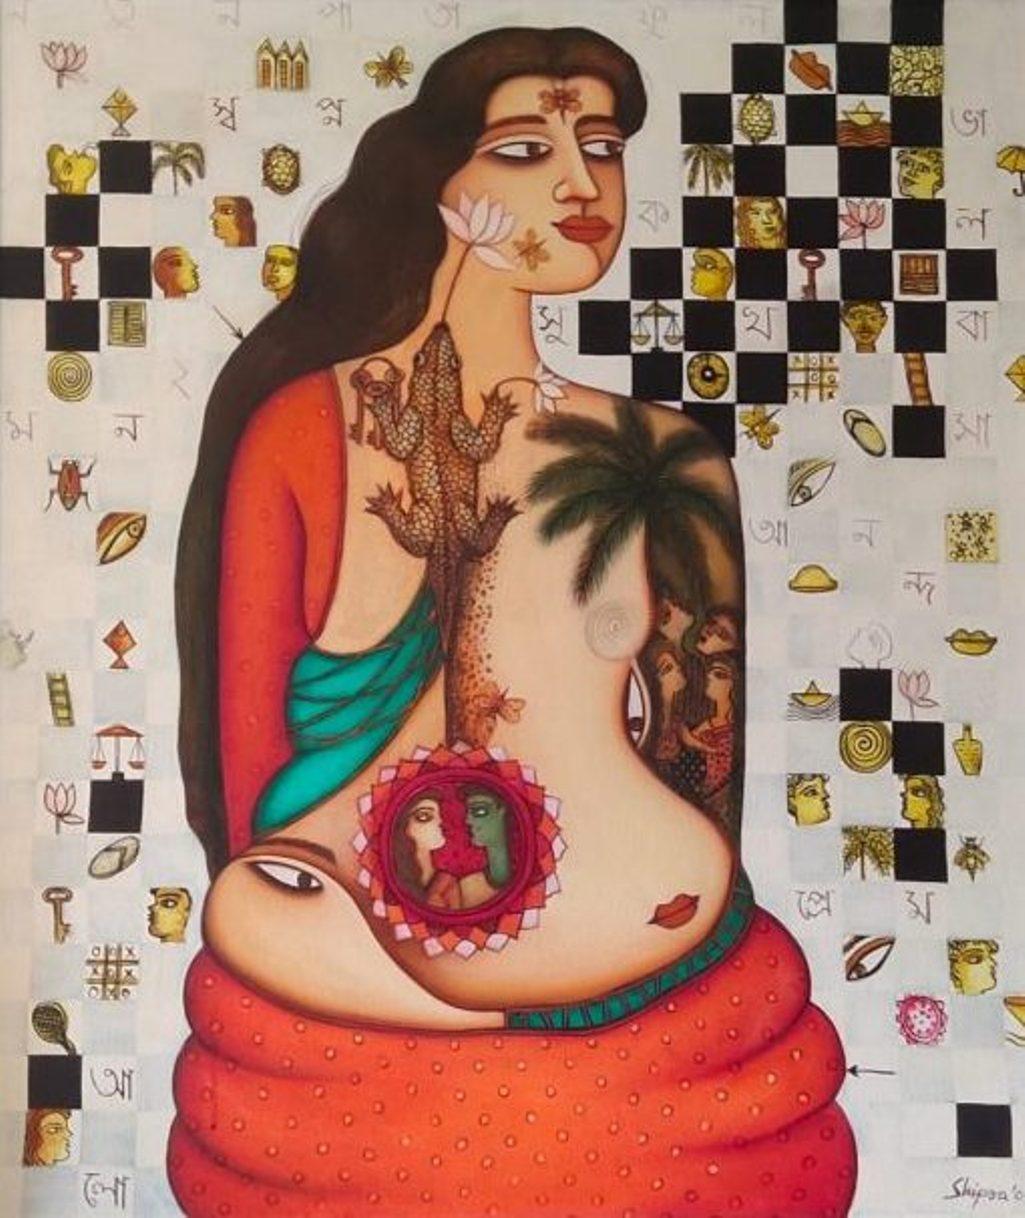 Shipra Bhattacharya Figurative Painting - She-I, Oil on Canvas, Orange, Black, Green by Contemporary Artist "In Stock"